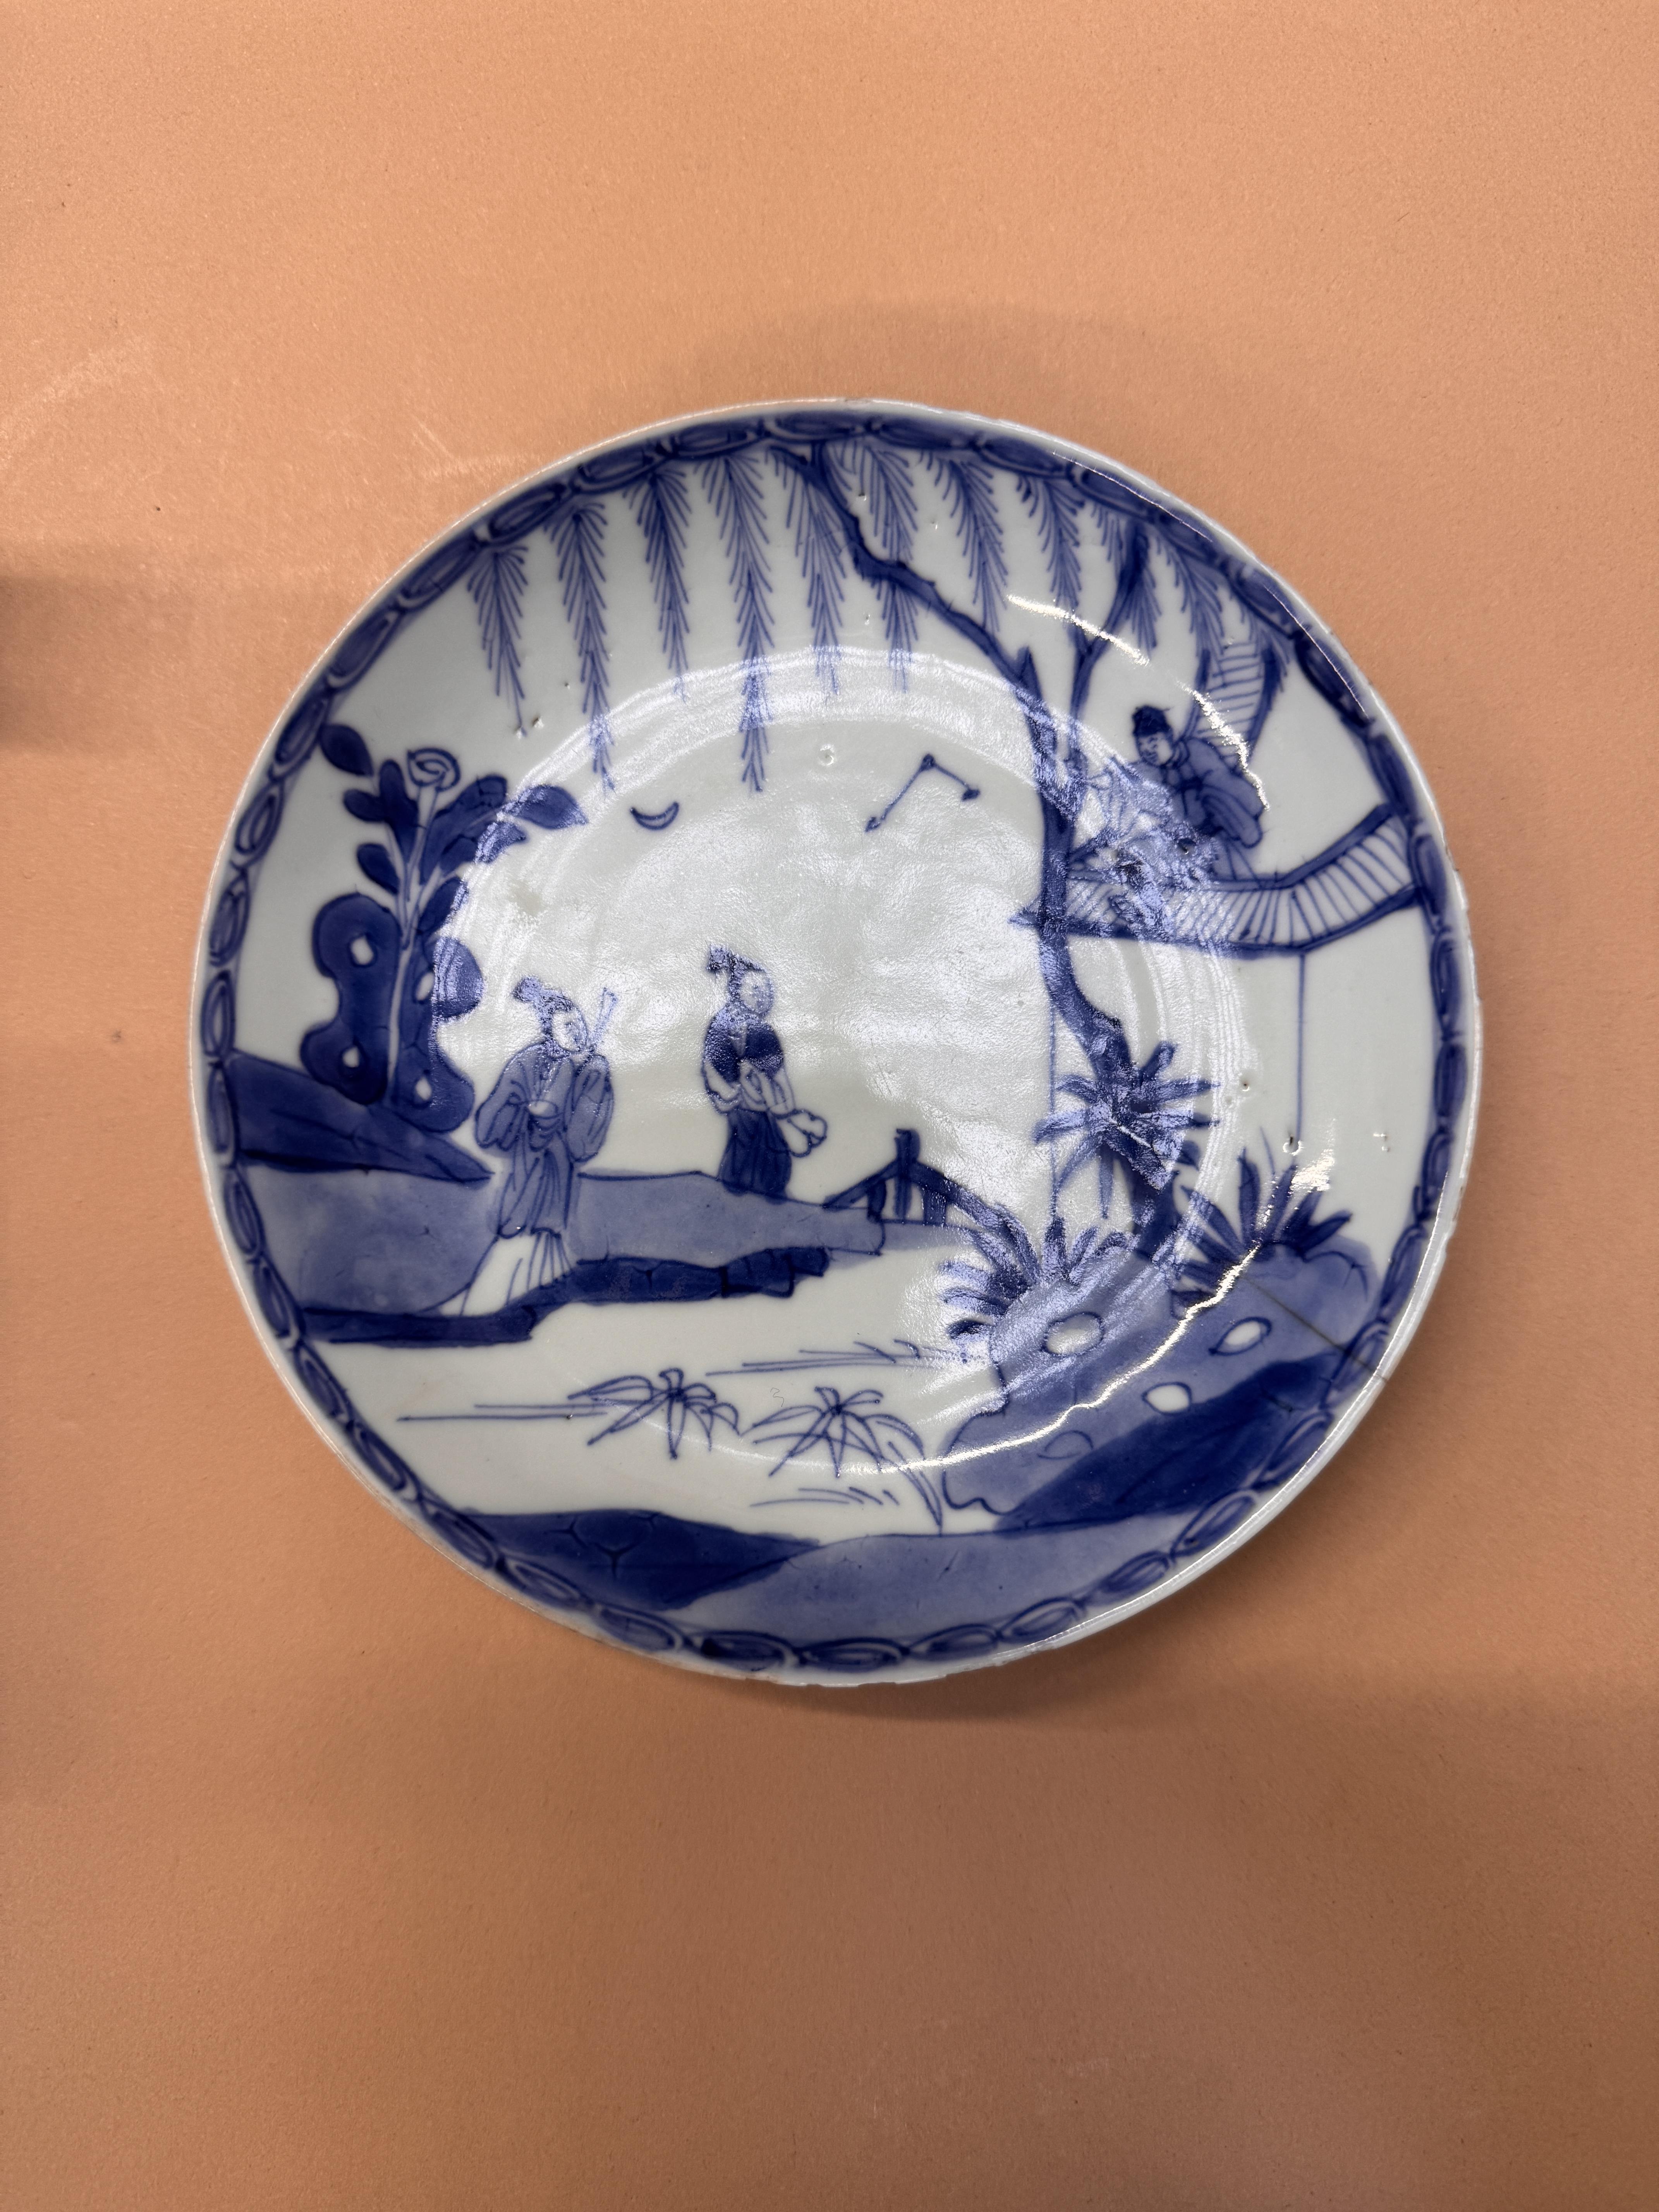 A CHINESE BLUE AND WHITE 'ROMANCE OF THE WESTERN CHAMBER' DISH 清康熙 青花繪西廂記人物故事圖盤 - Image 5 of 9